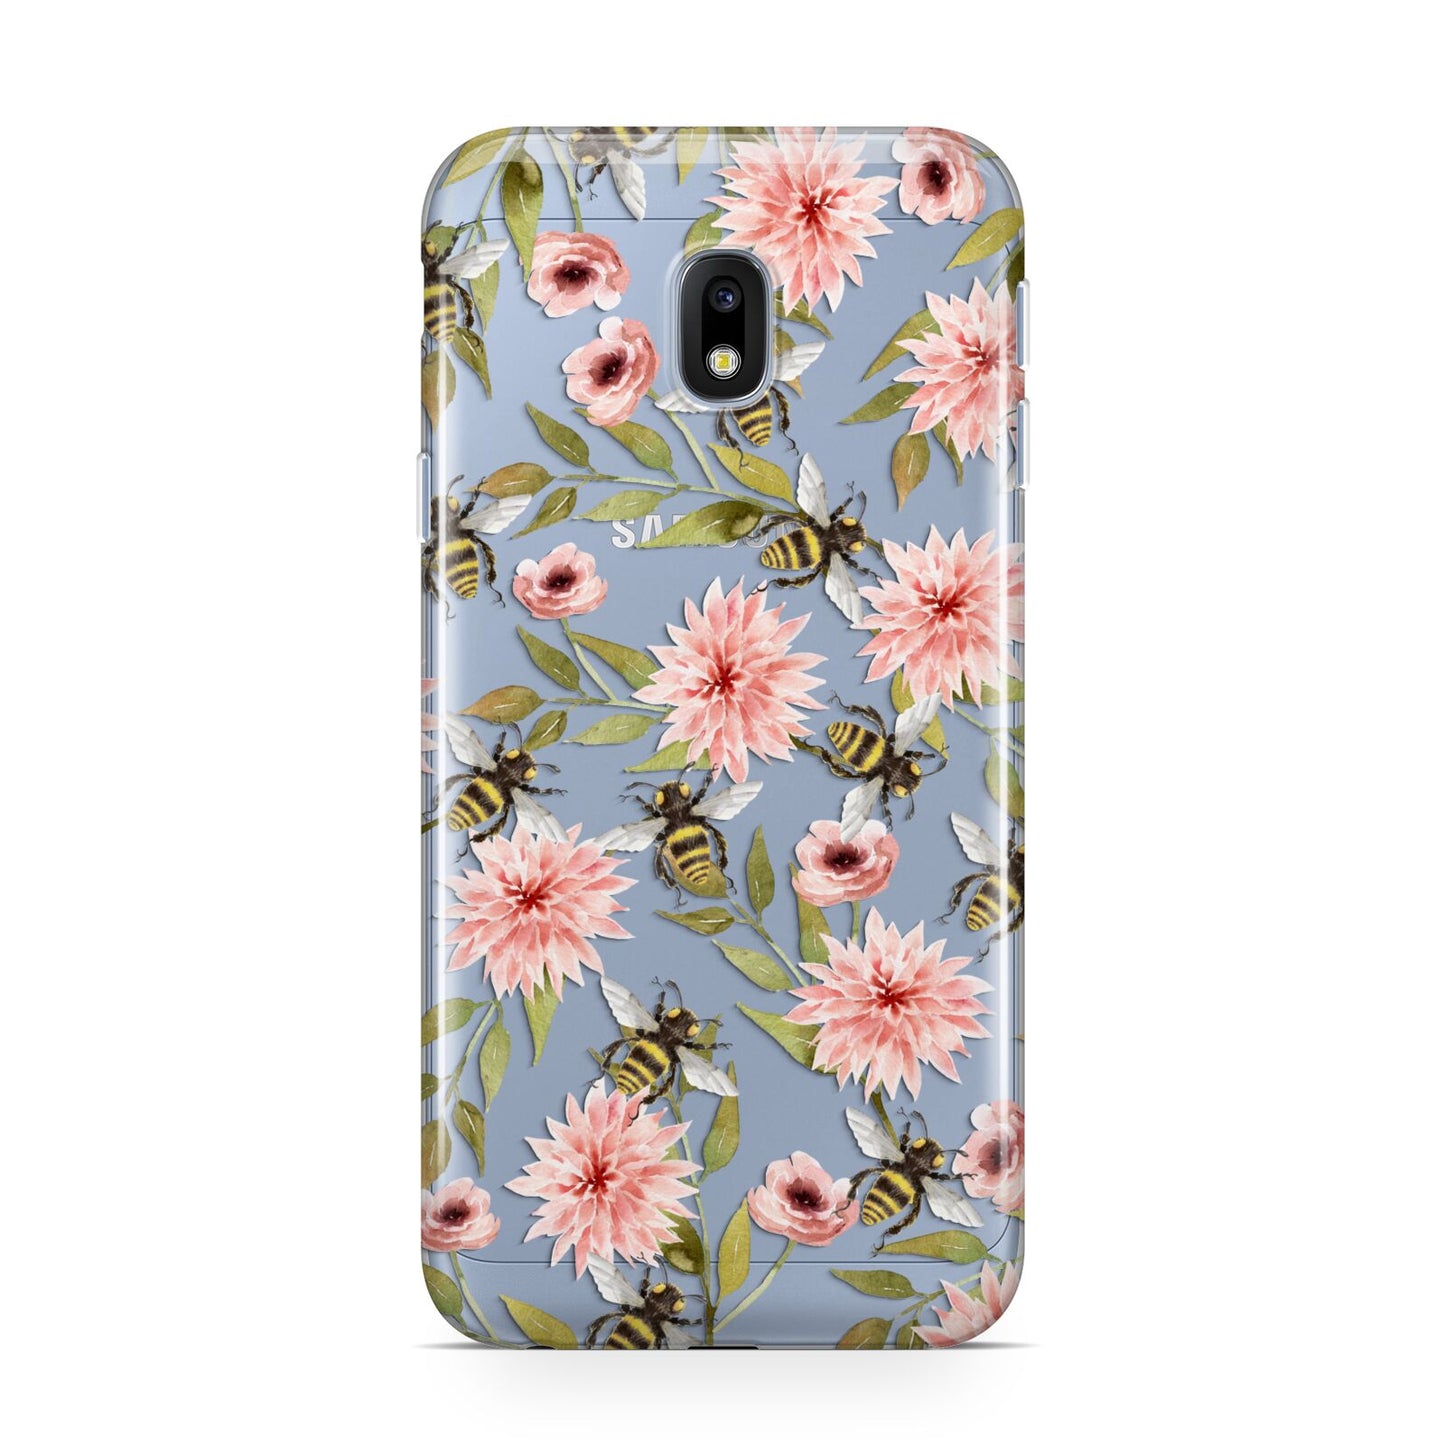 Pink Flowers and Bees Samsung Galaxy J3 2017 Case